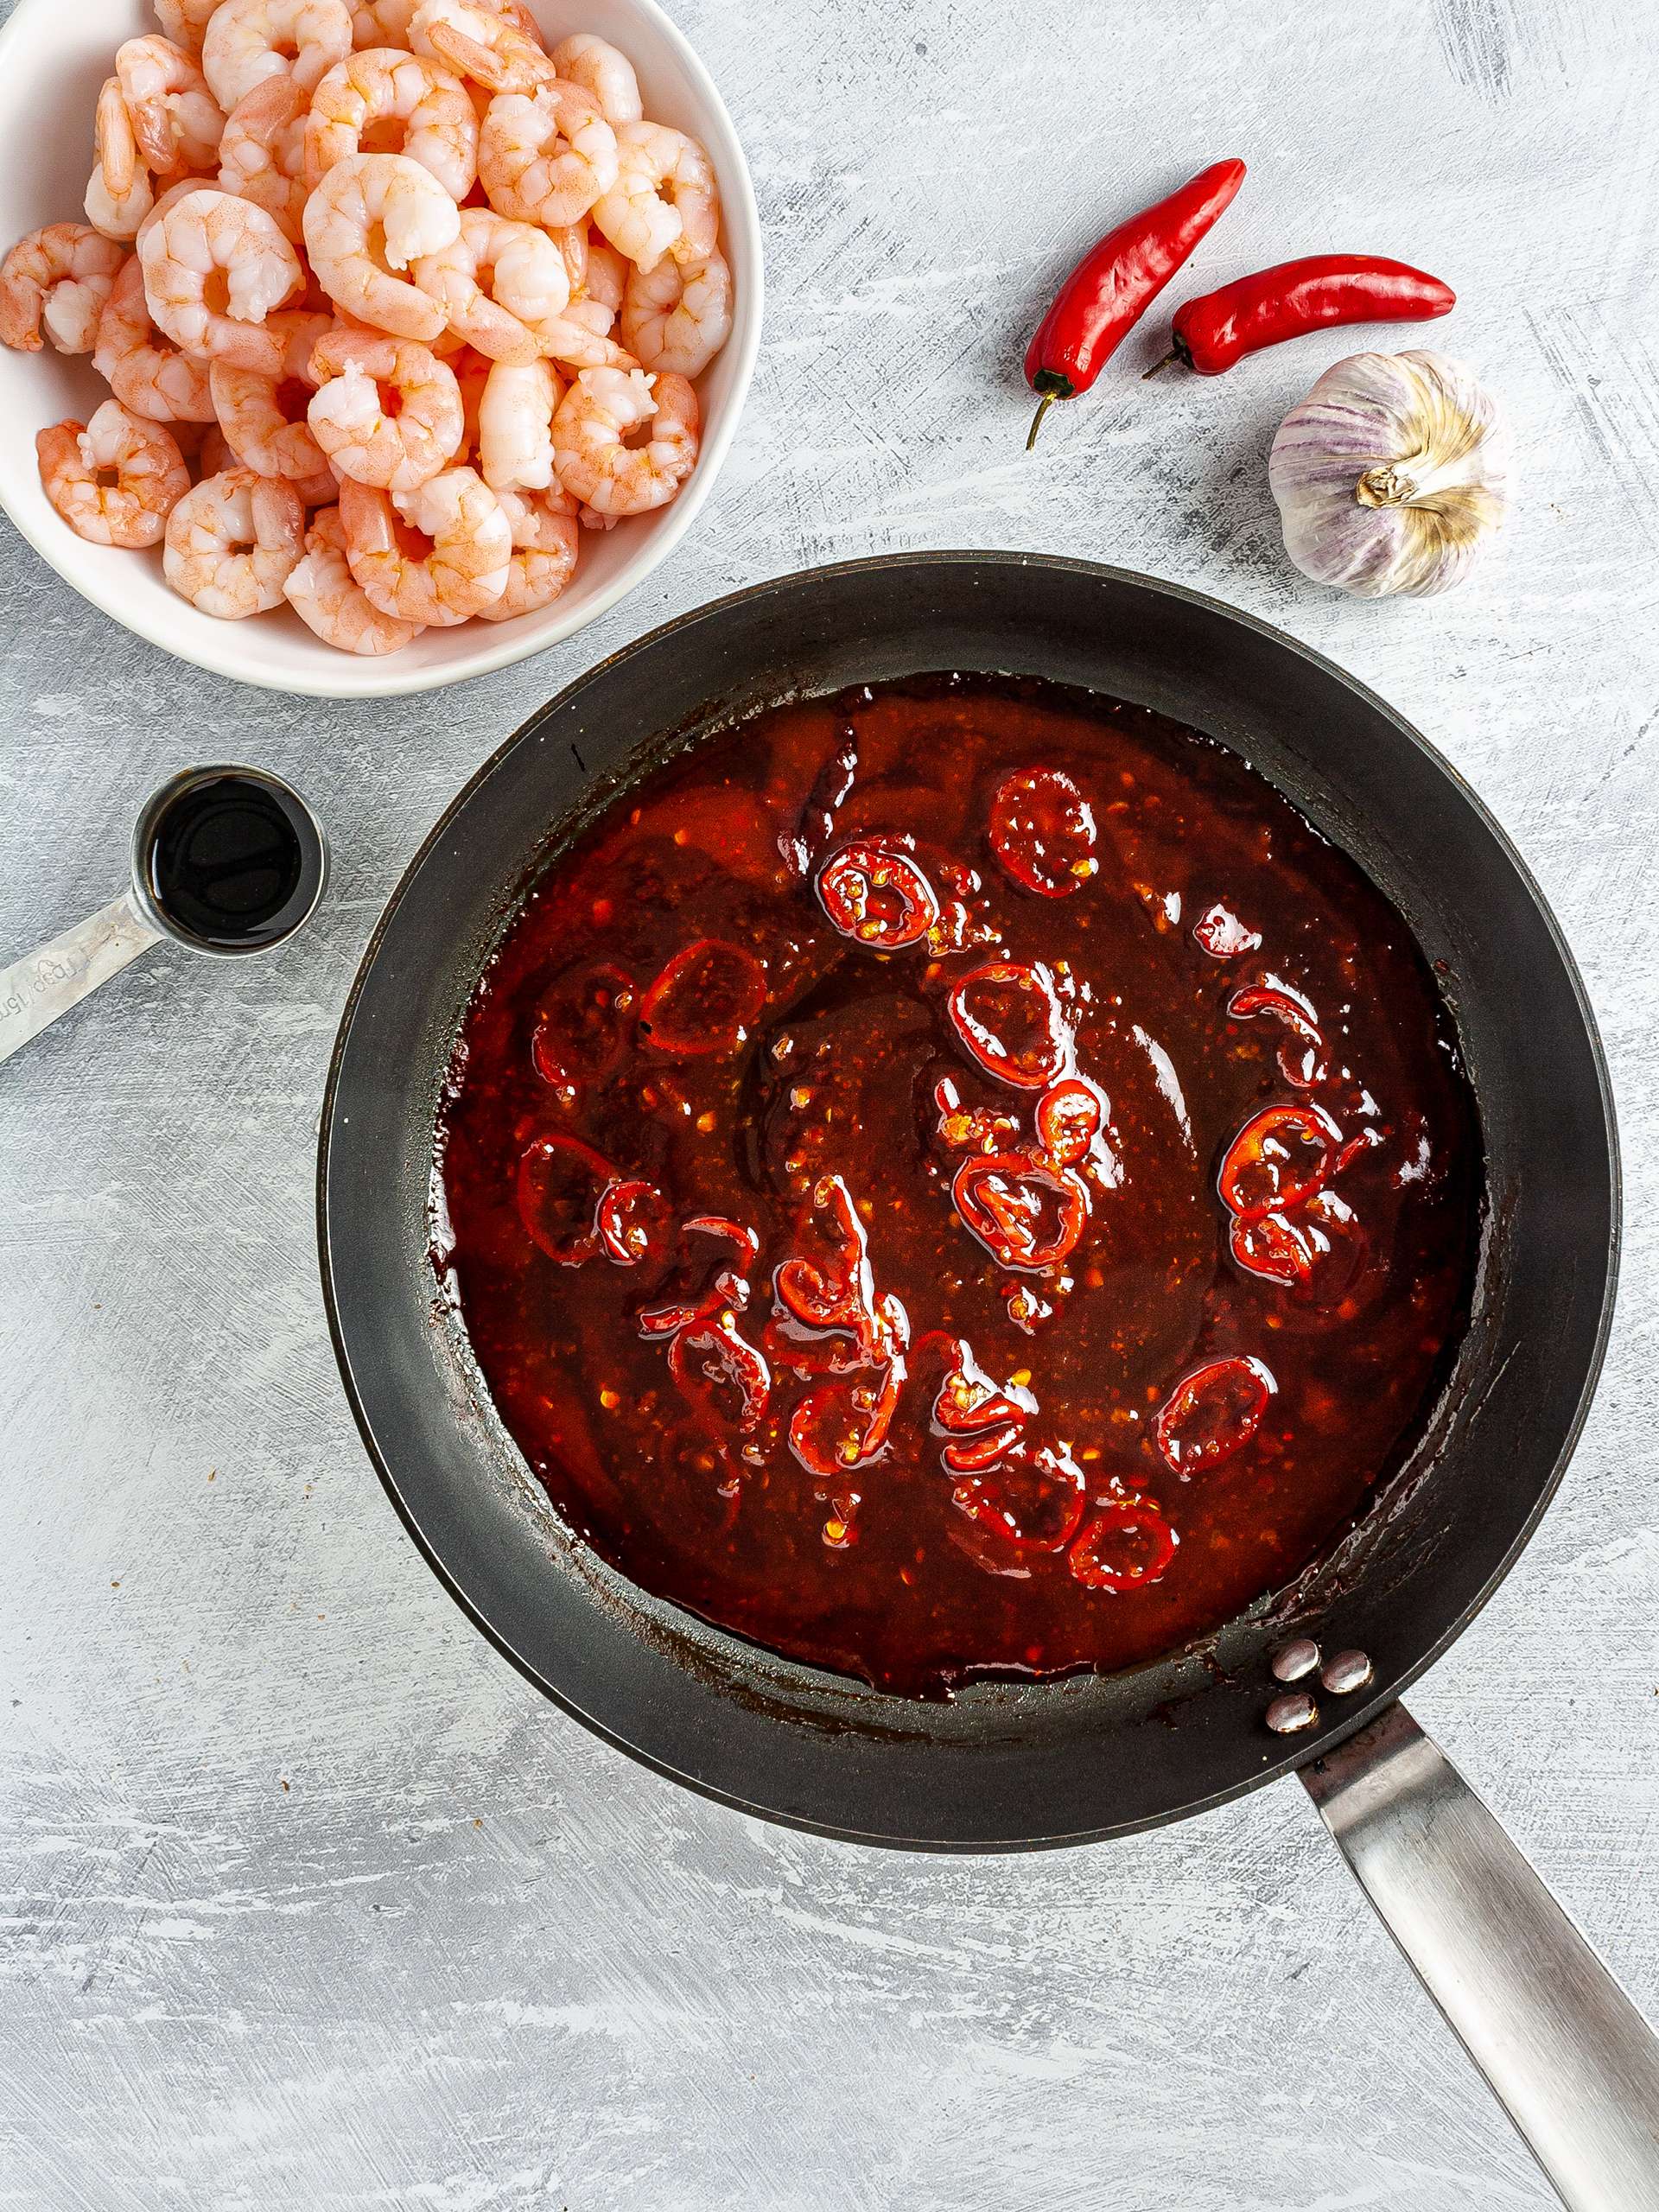 Prawns and sweet chili sauce with soy, tomato, and honey